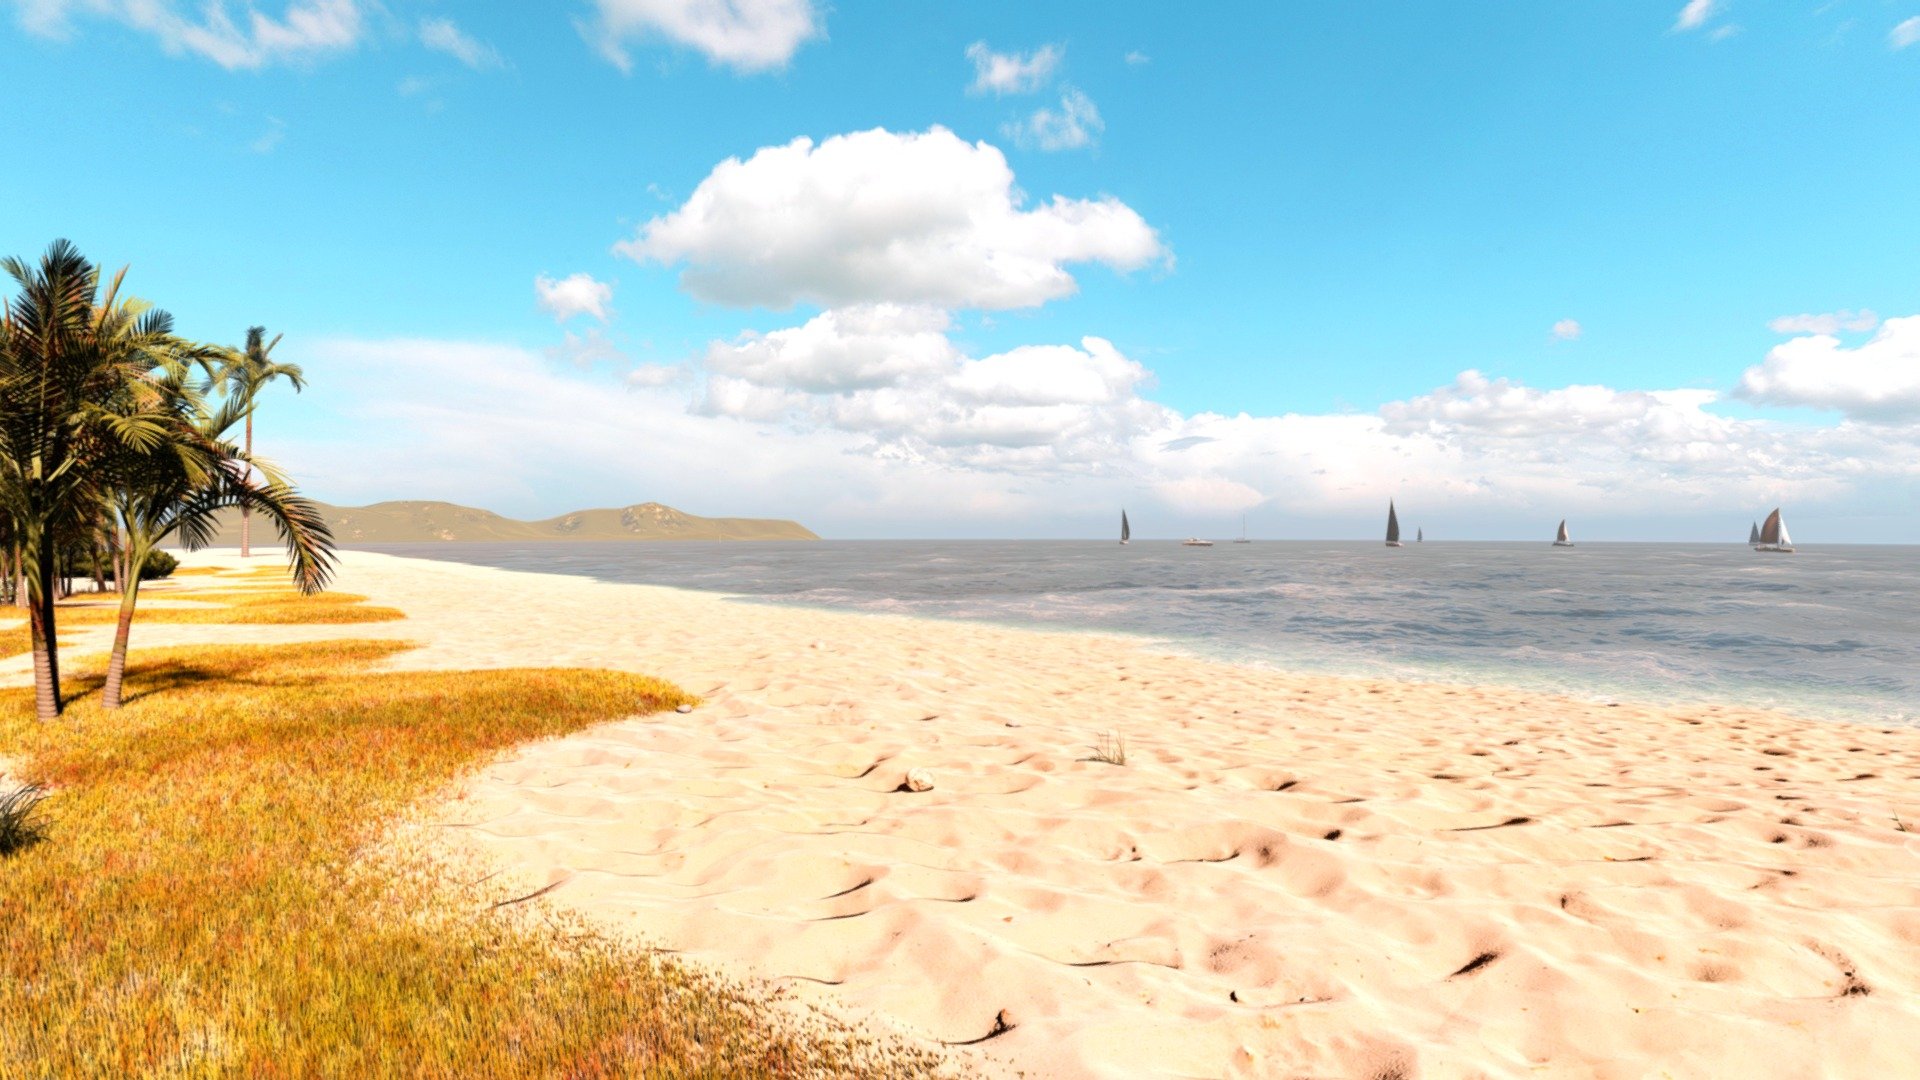 HDRI &amp; SKY BOX 8K - BEACH MORNING SCENE





Image 360- 8k resolution




HDRI File



Used as a landscape cover in architectural, interior and landscape design software, used as hdri images, wallpaper&hellip; - HDRI & SKY BOX 8K - BEACH MORNING SCENE - Buy Royalty Free 3D model by Architecture_Interior 3d model